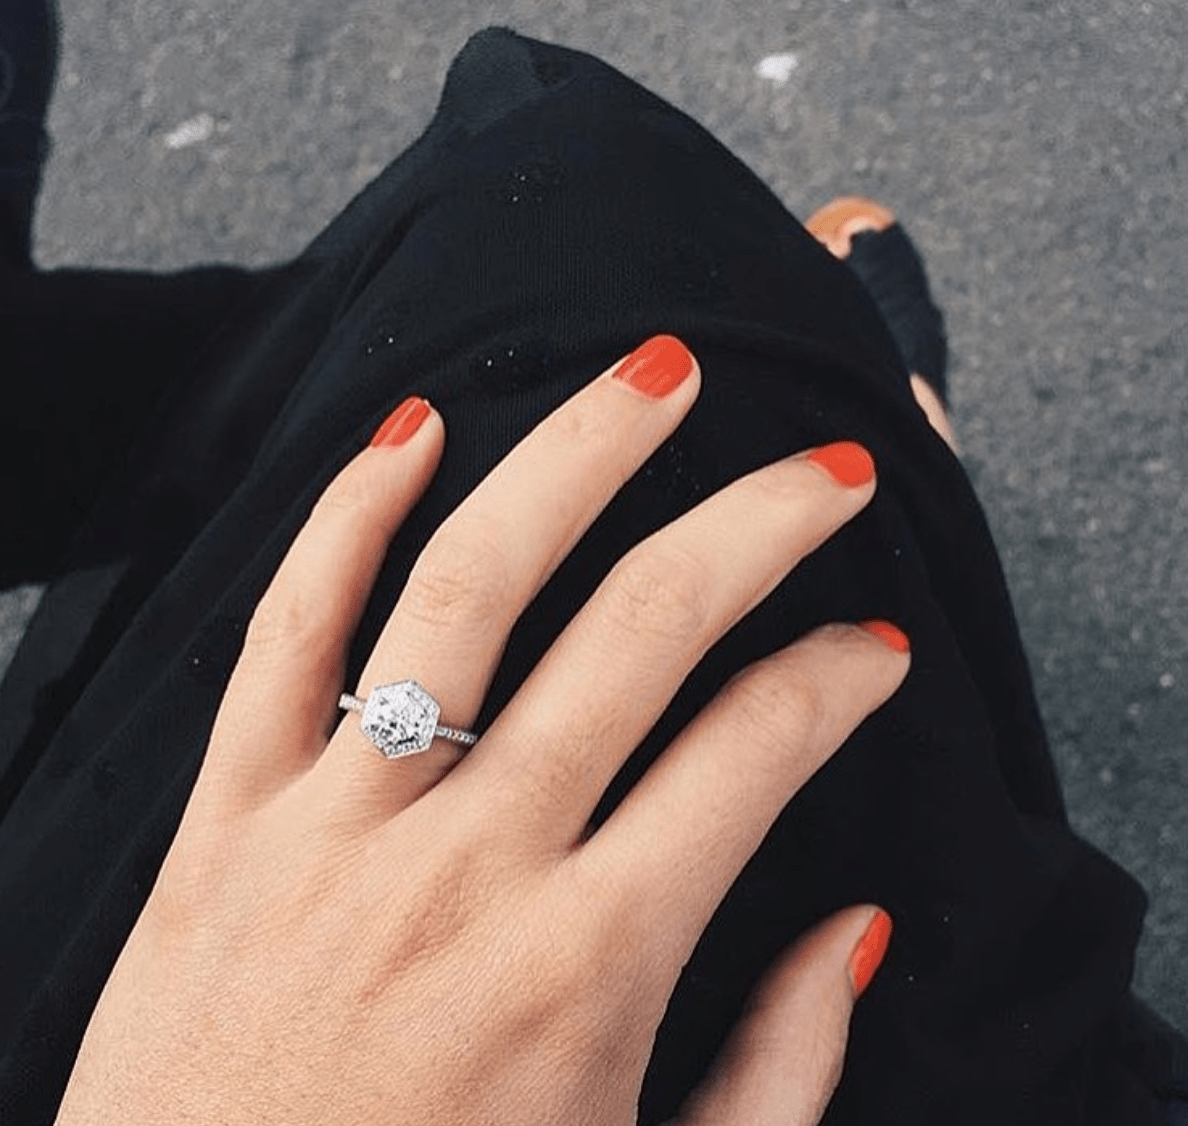 Where Is Sydney Adams Engagement Ring from